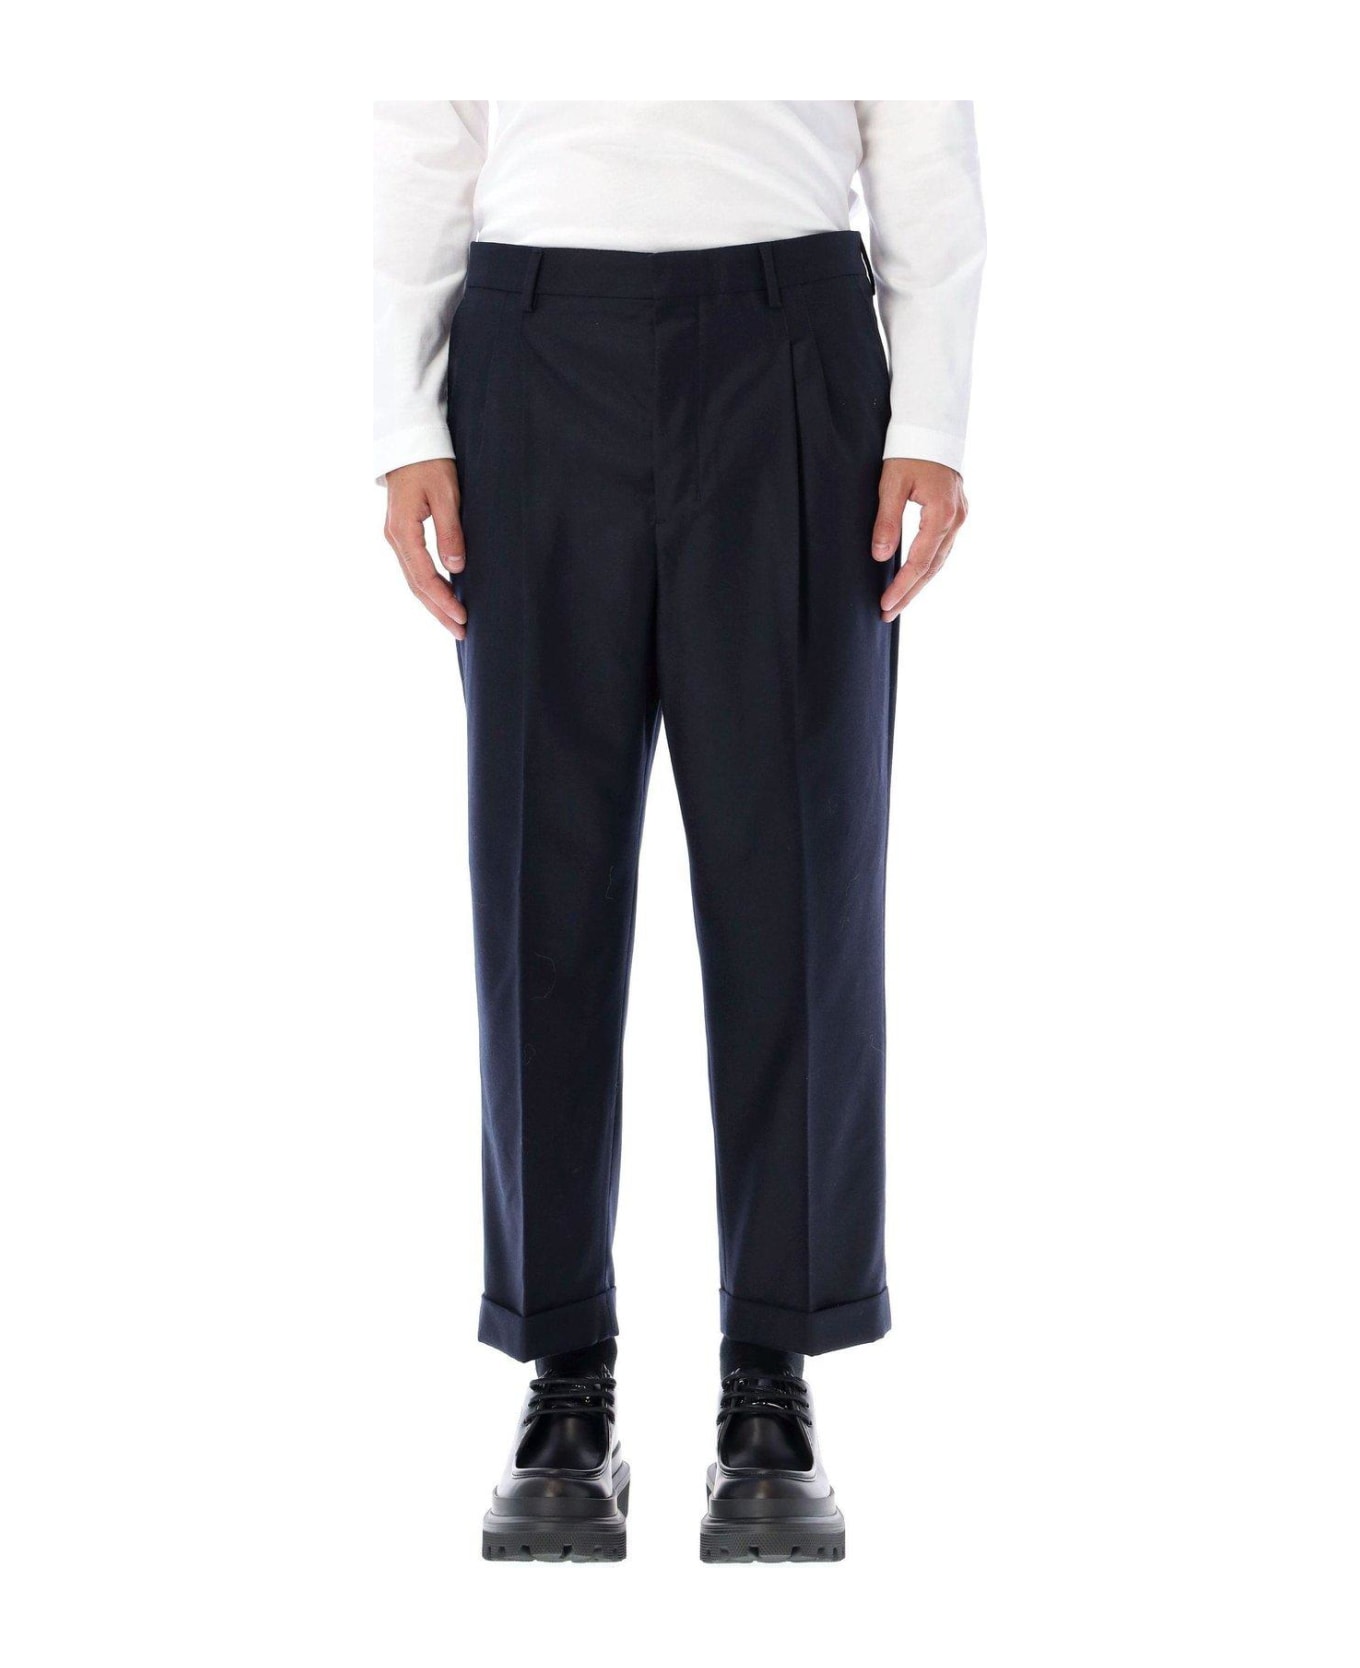 Ami Alexandre Mattiussi Pleated Carrot Fit Trousers - Blue ボトムス